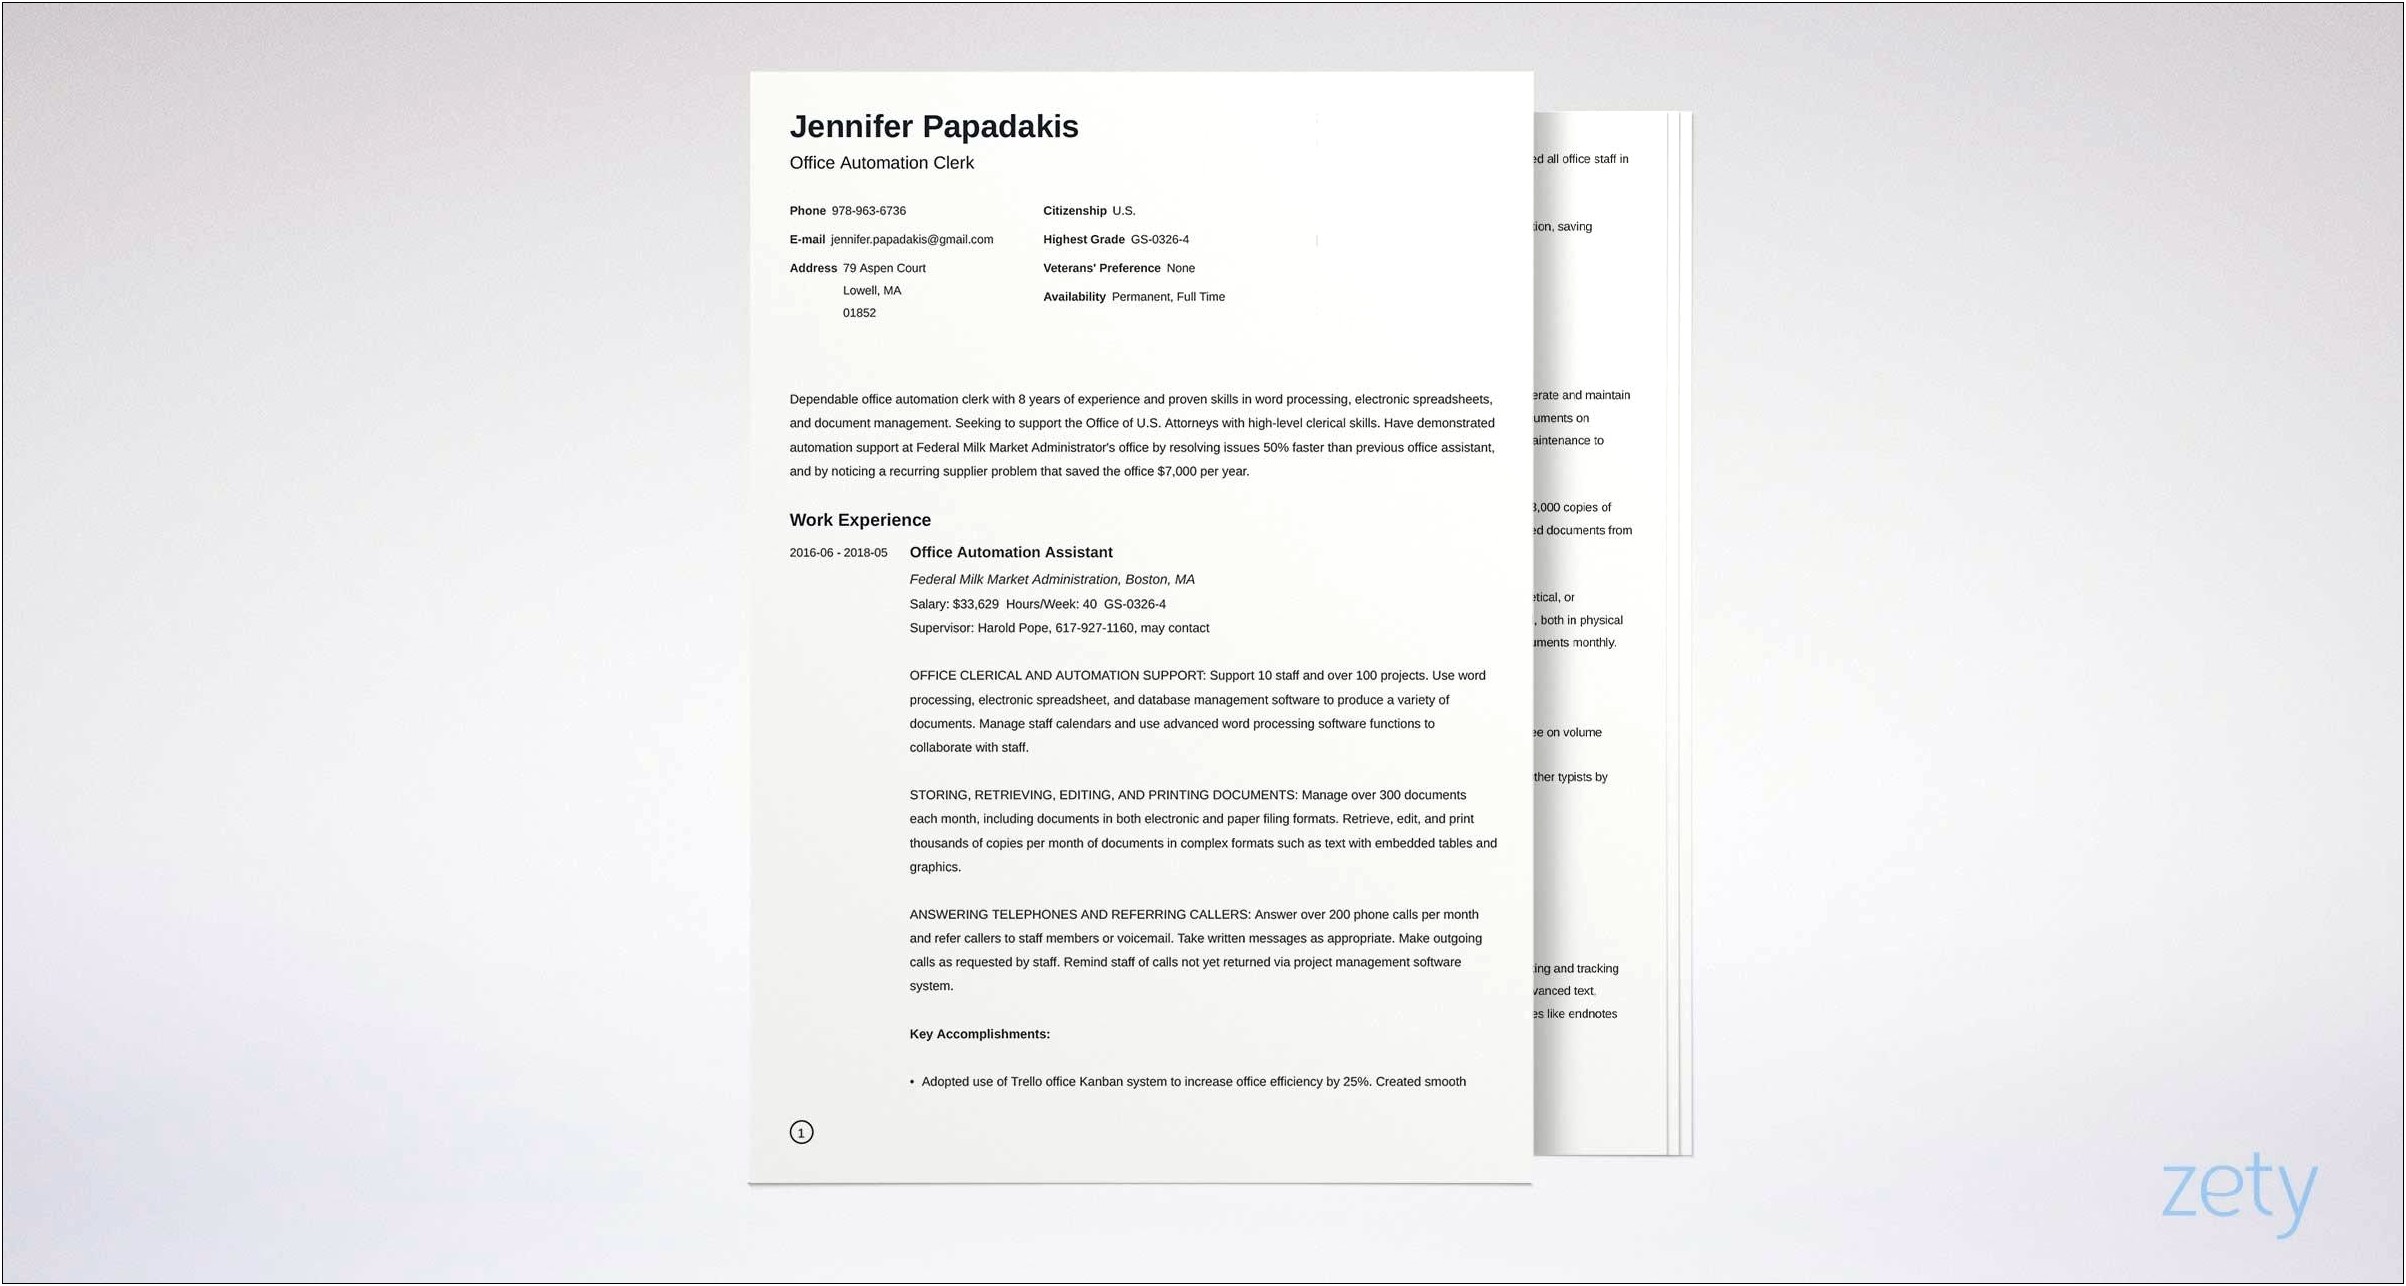 Resume Requirements For Federal Jobs